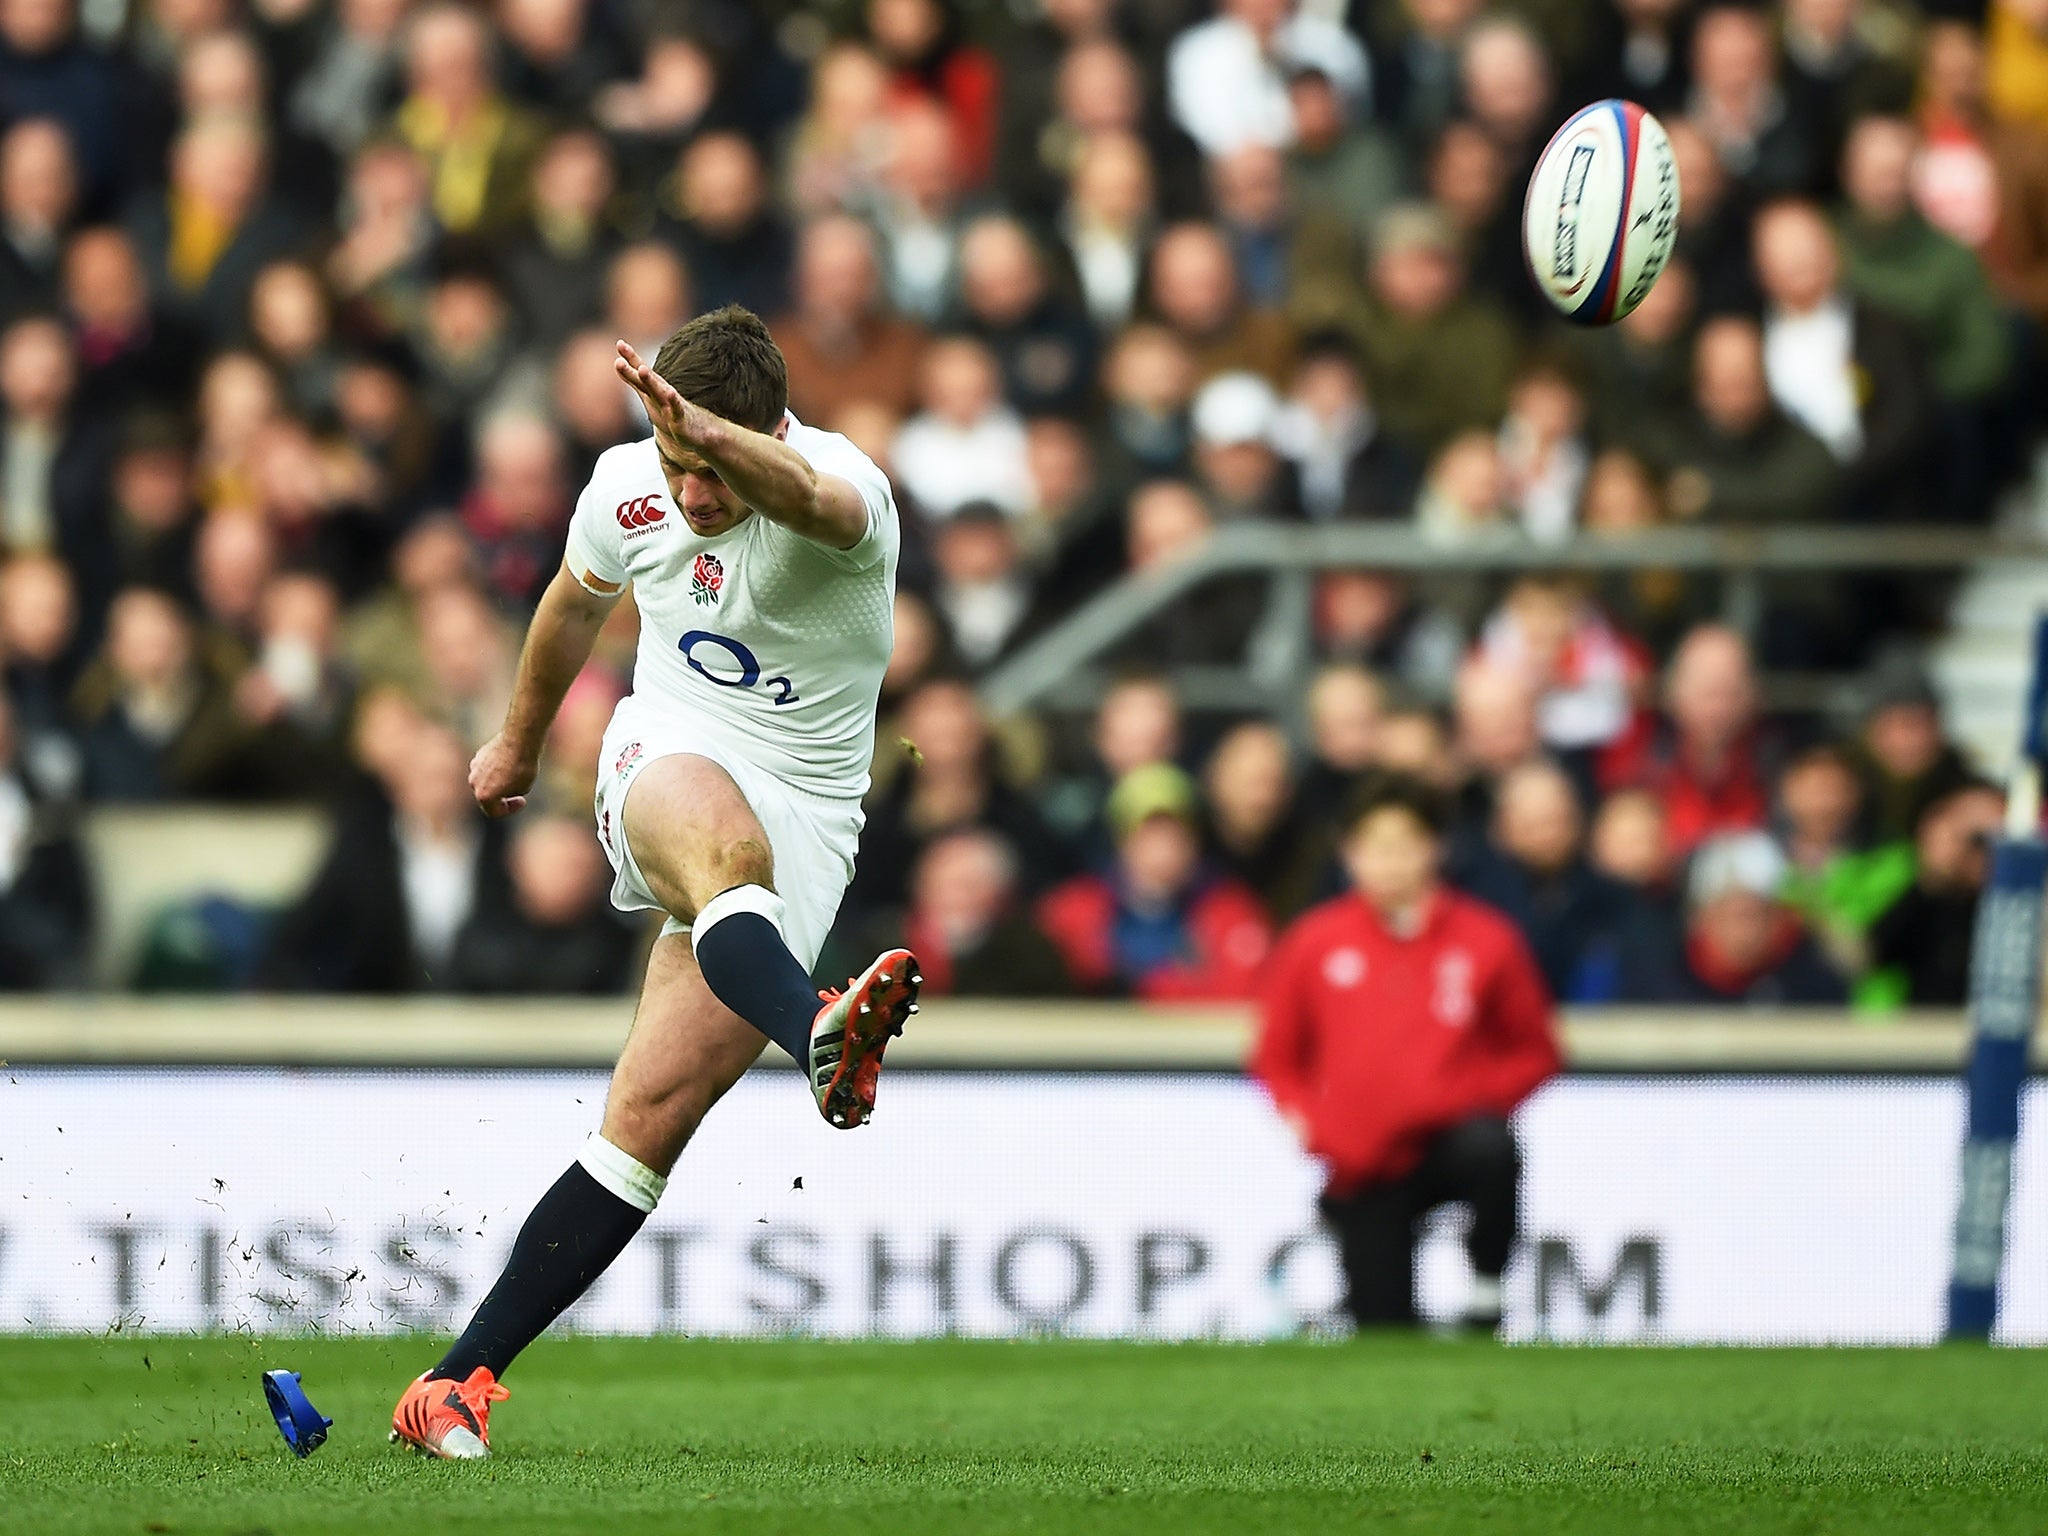 George Ford scored 10 points, including an early second half try